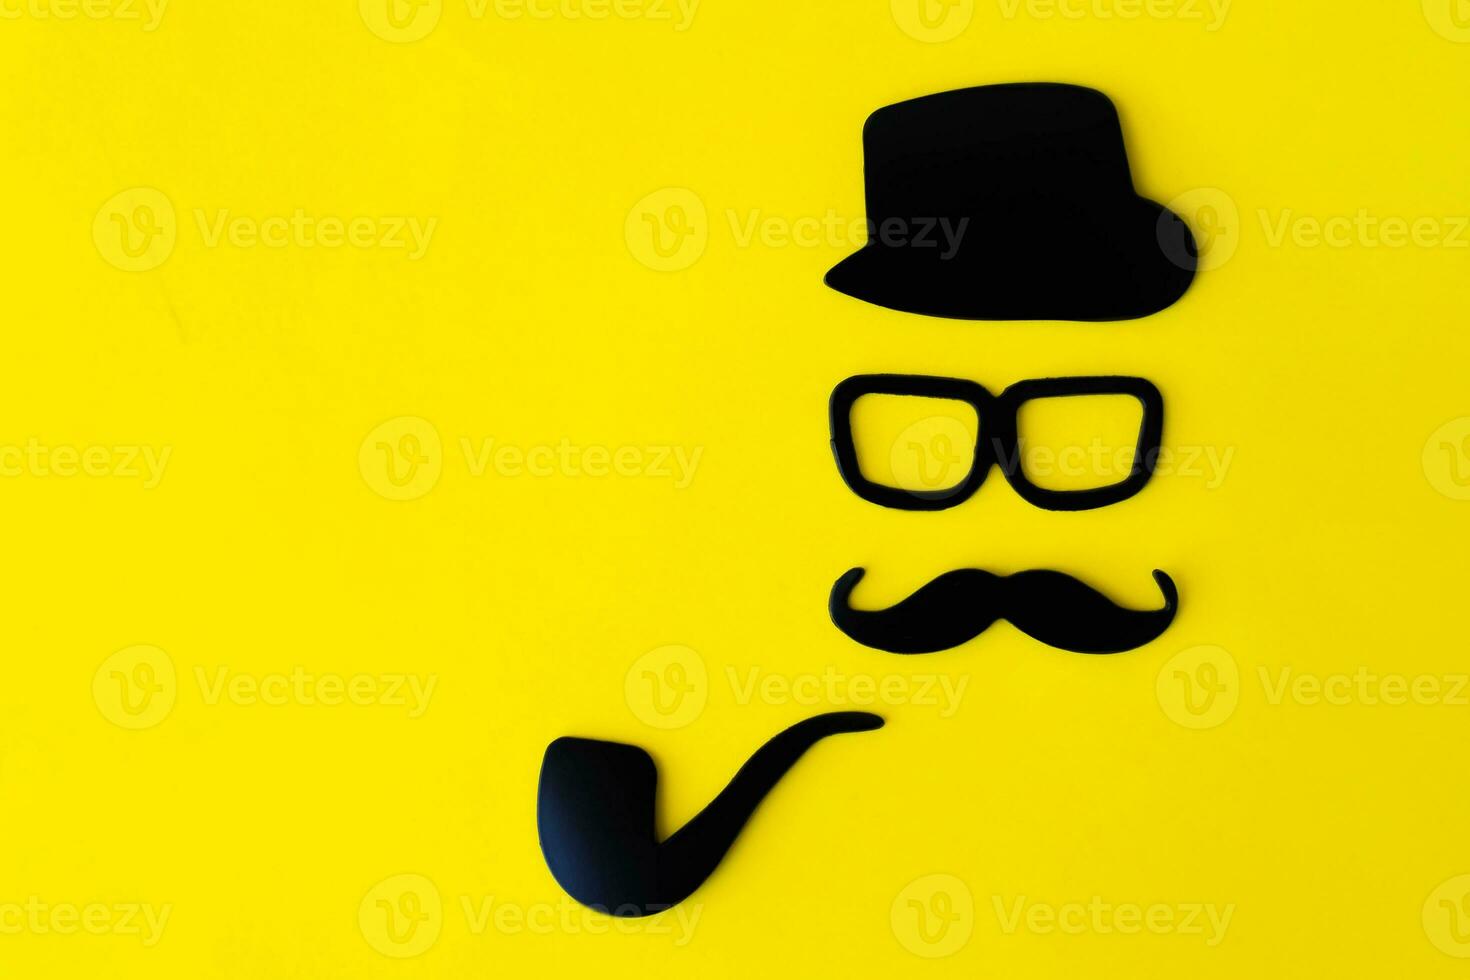 Happy fathers day sticker, hat, glasses, black mustache, and smoking pipe on a yellow background. Hipster objects. Father's day is a holiday photo